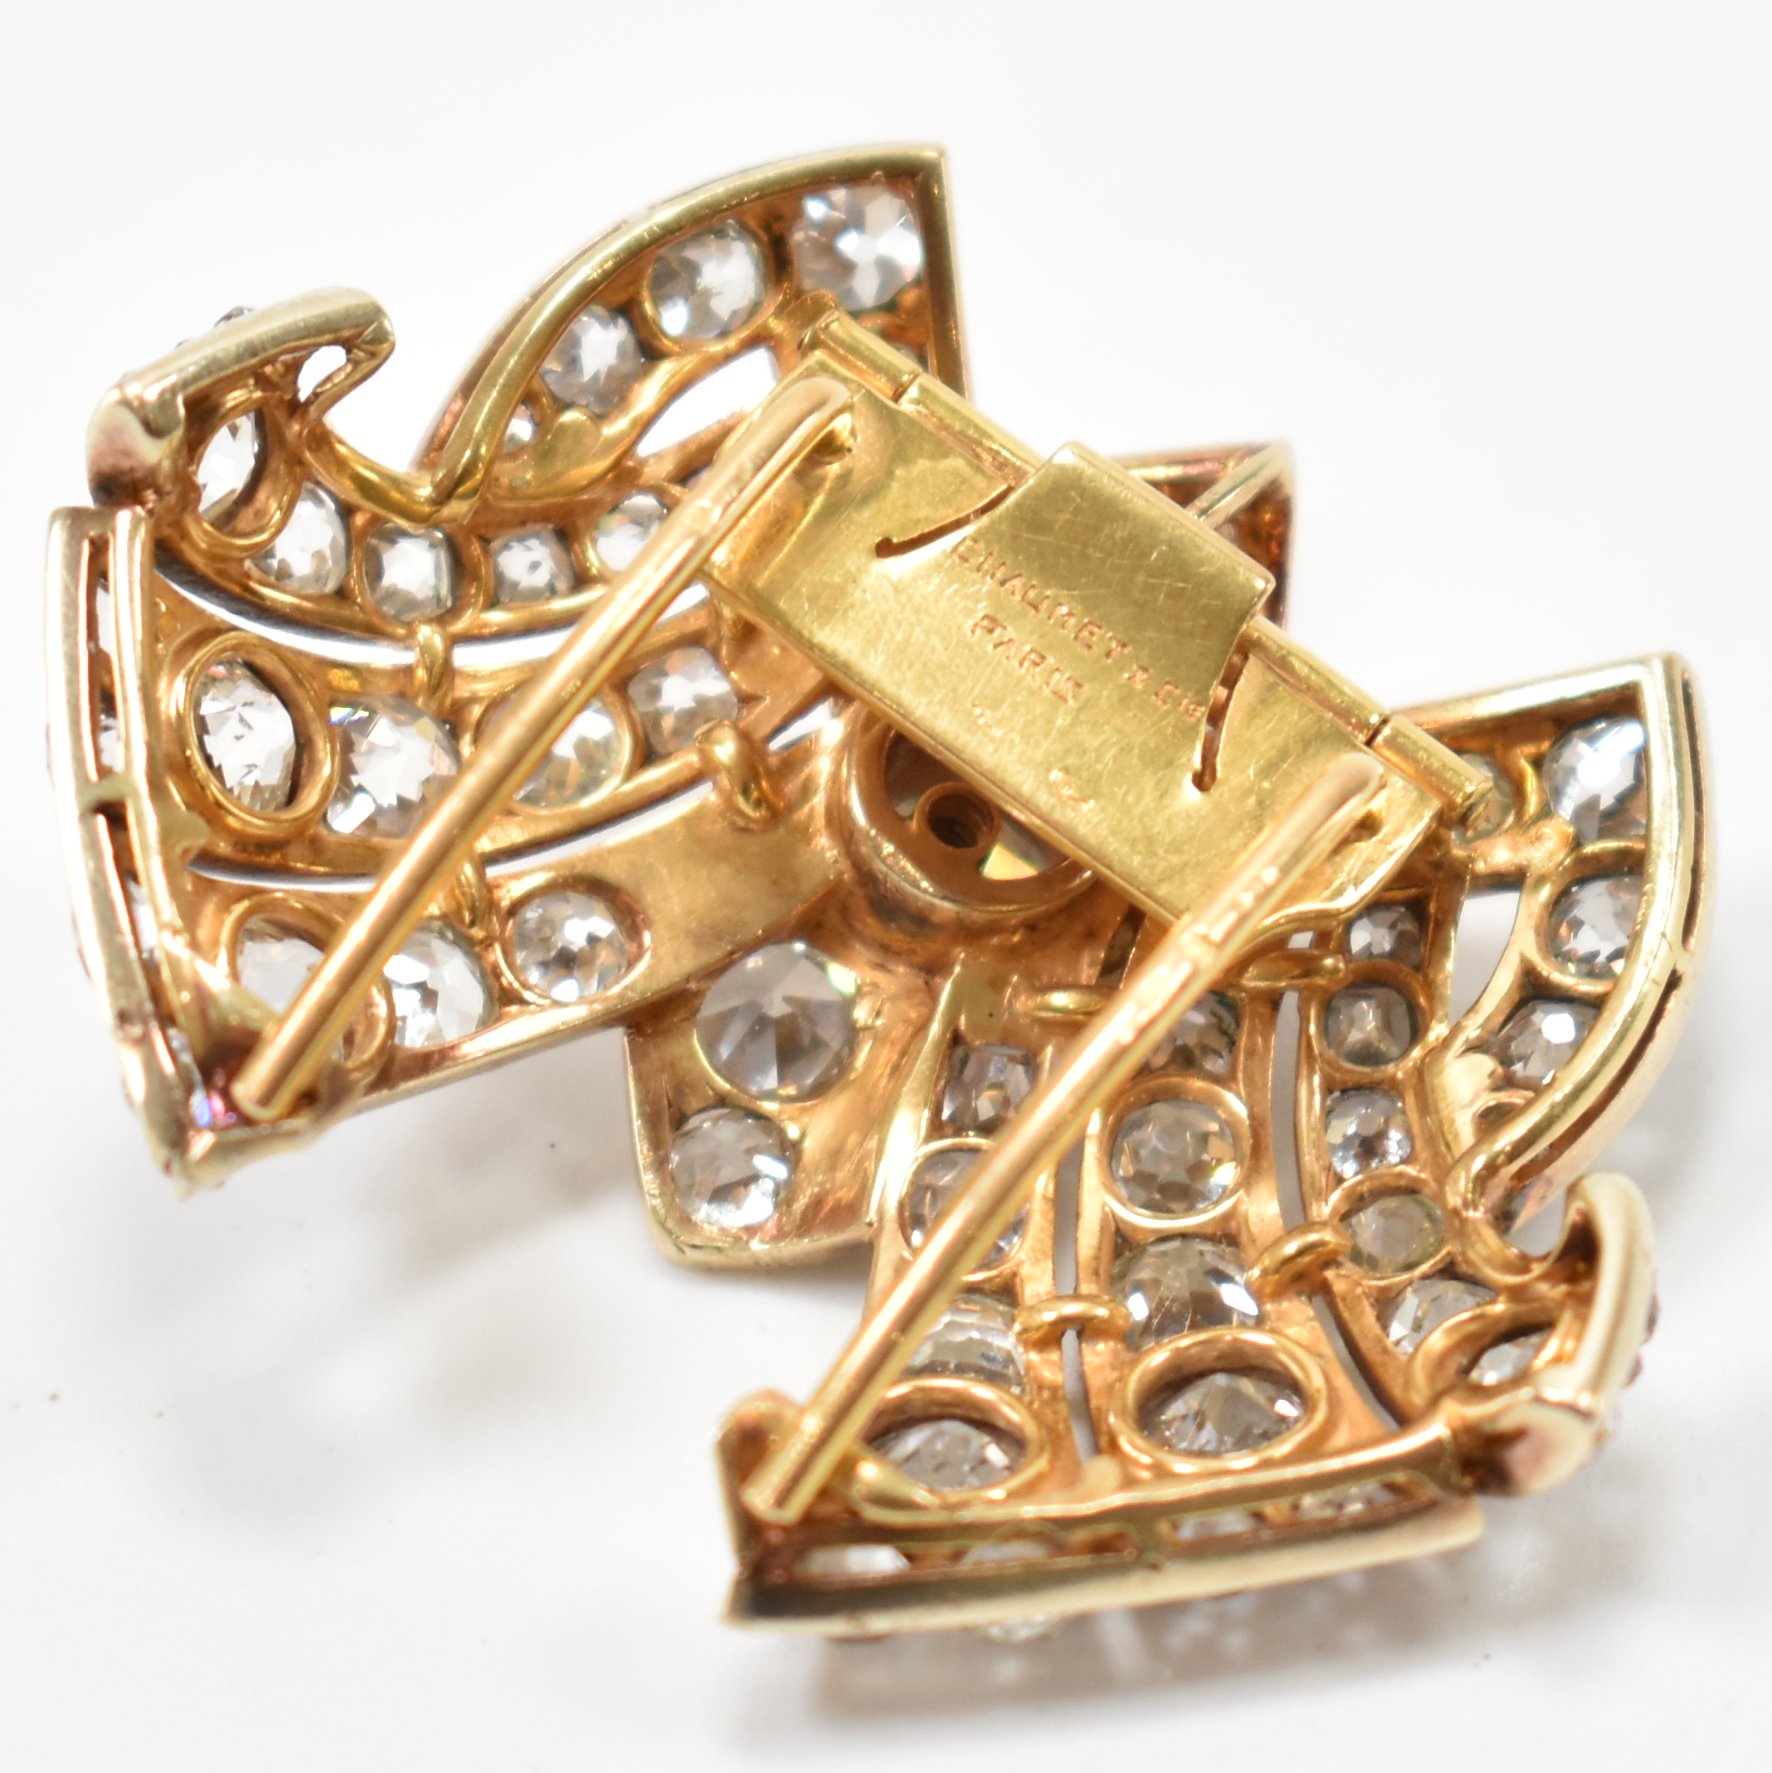 FRENCH CHAUMET PARIS DIAMOND BROOCH CLIP - Image 3 of 7